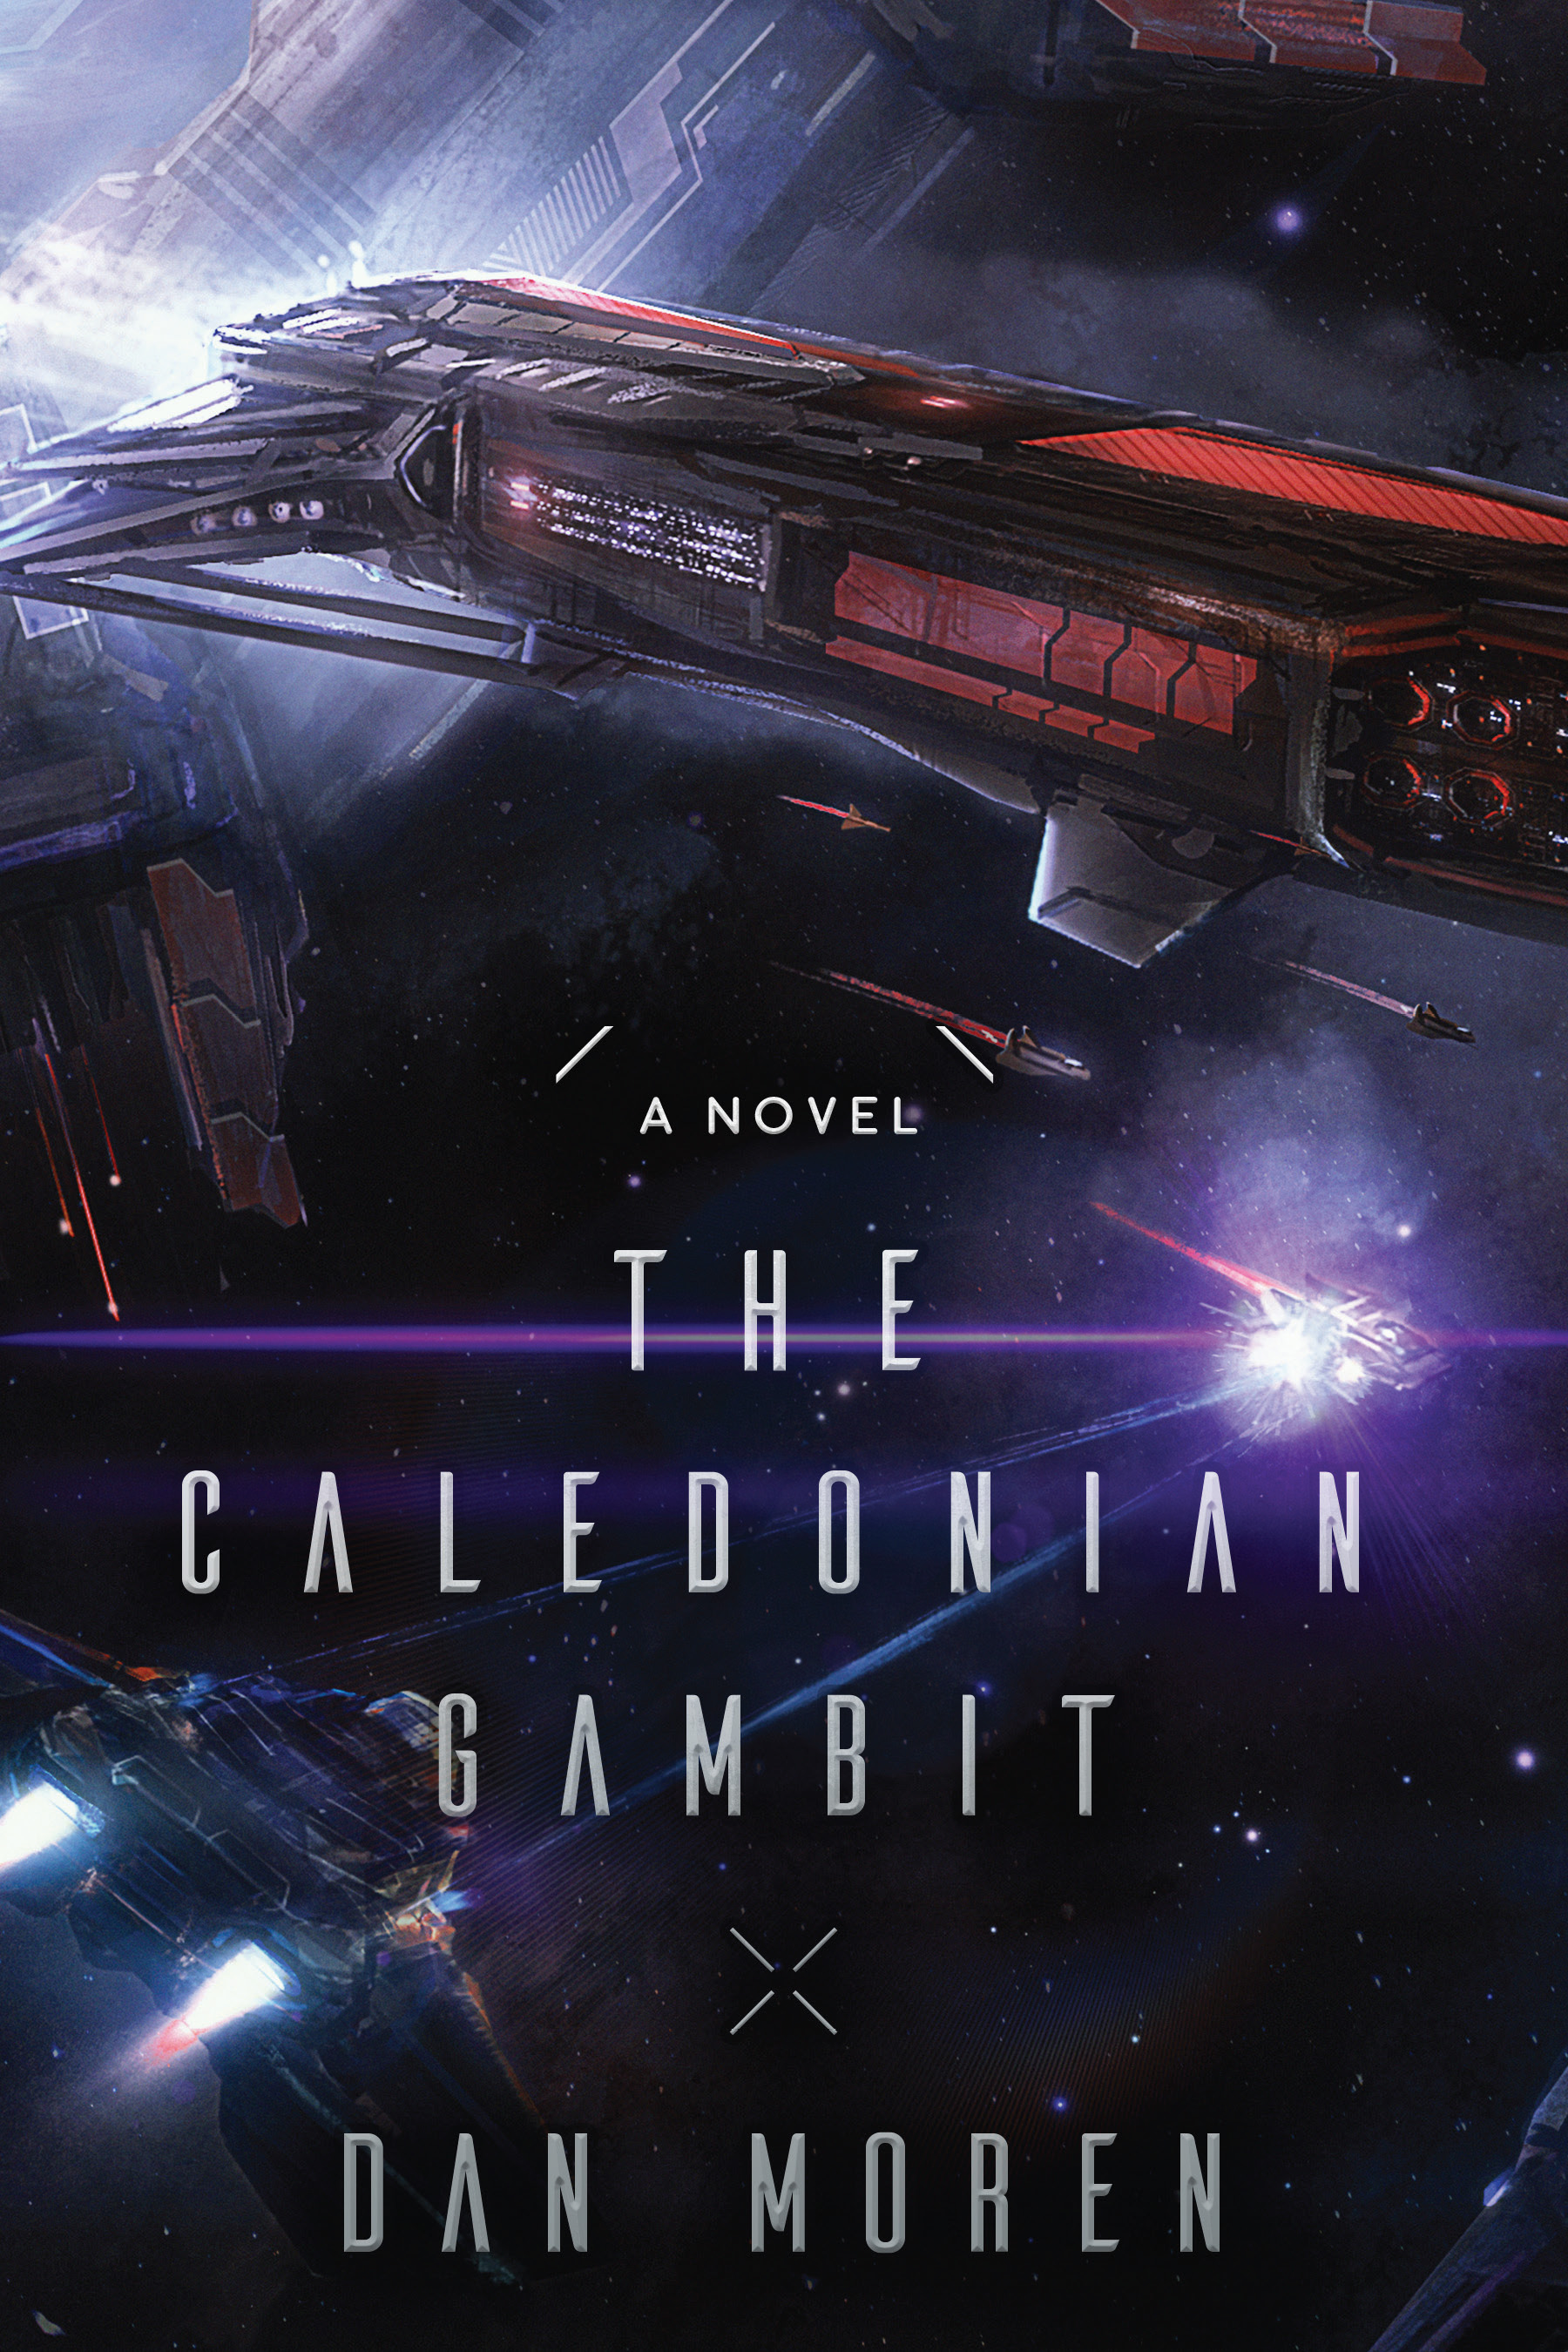 Book cover for The Calendonian Gambit by Dan Moren - a space battle with multiple ships of varying sizes